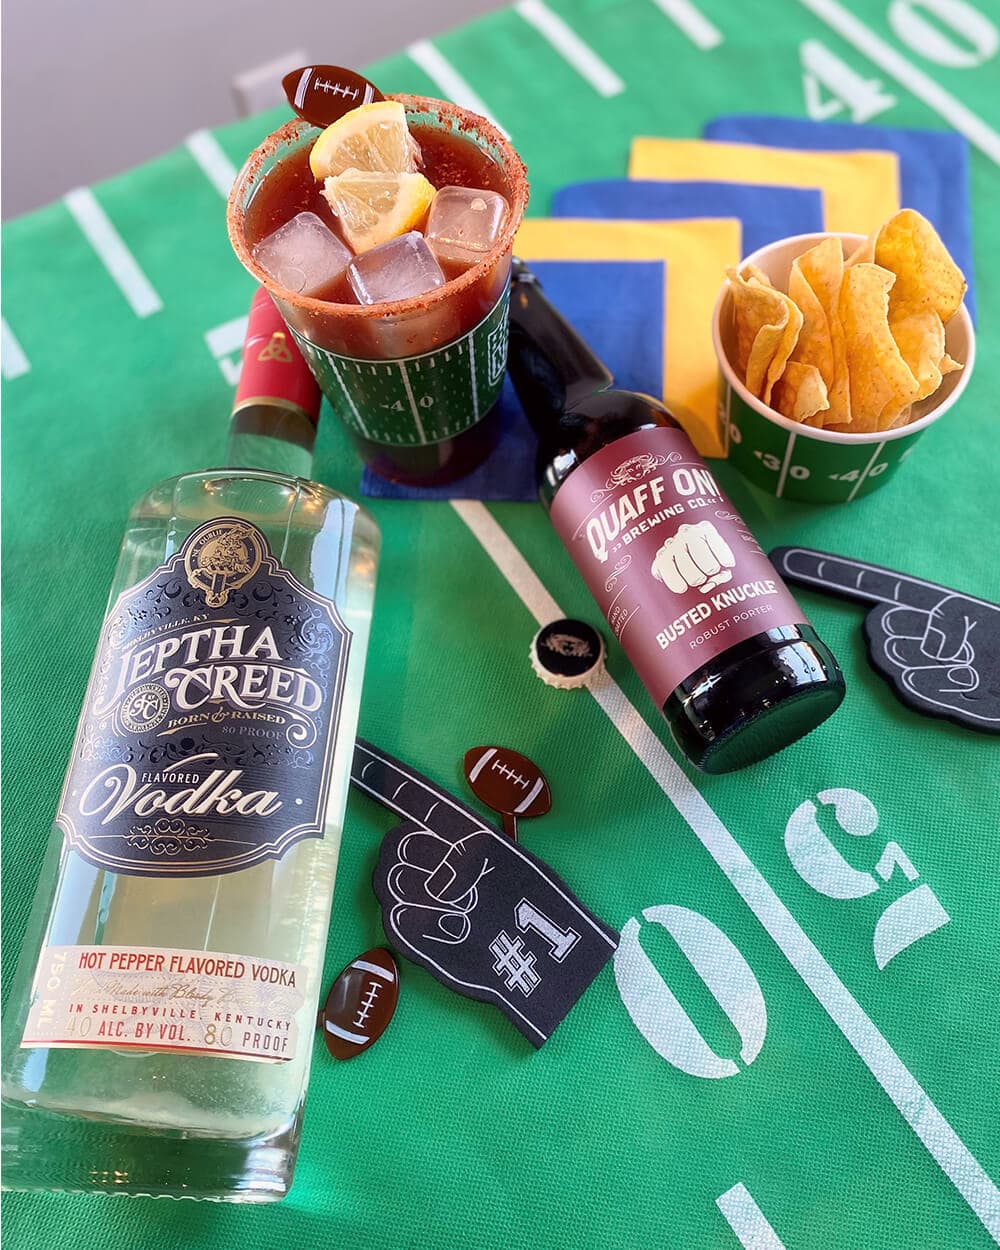 Jeptha Creed vodka bottle with football field background